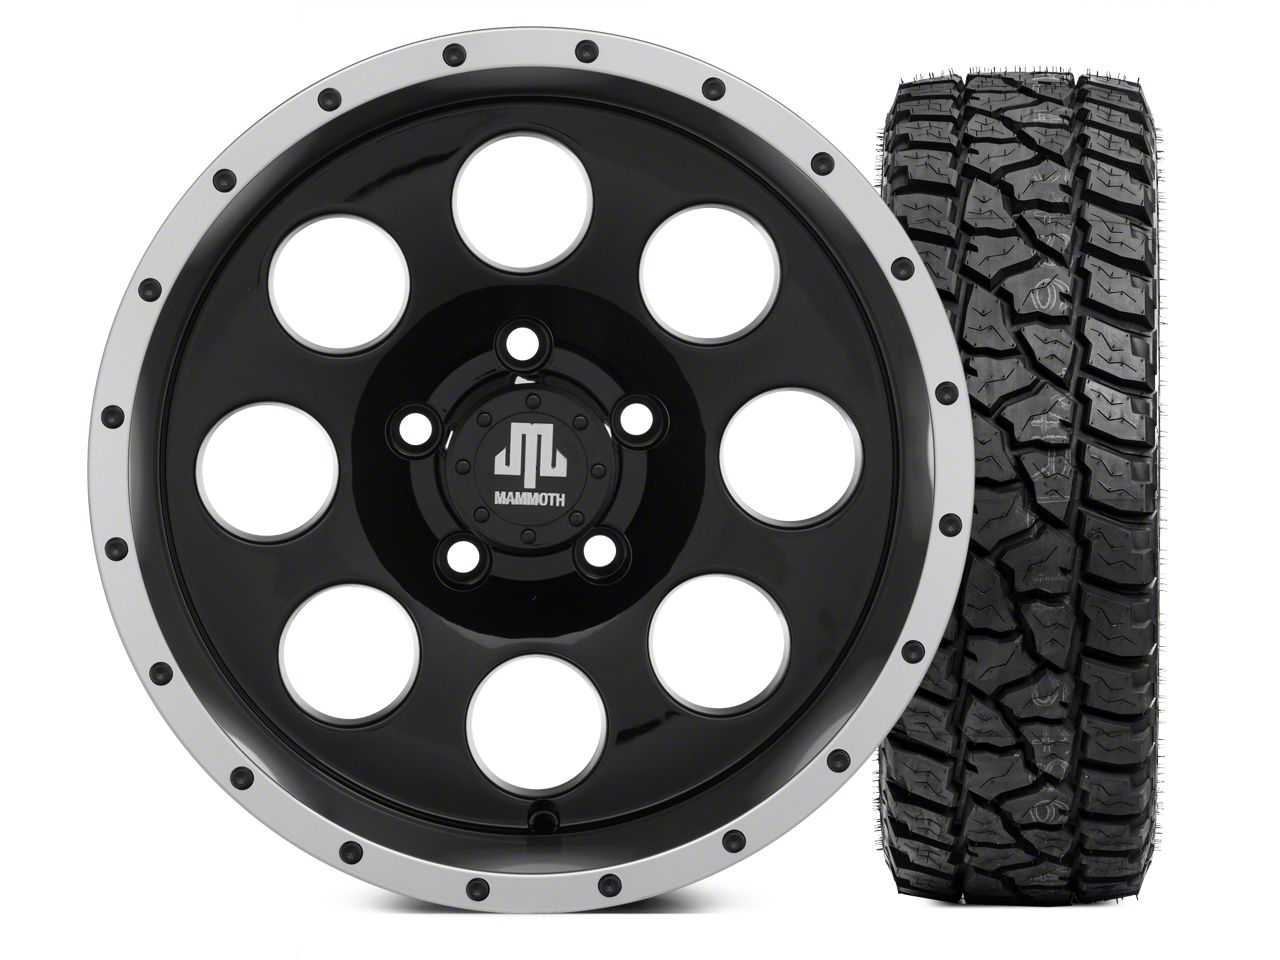 F150 Wheel & Tire Packages 1997-2003